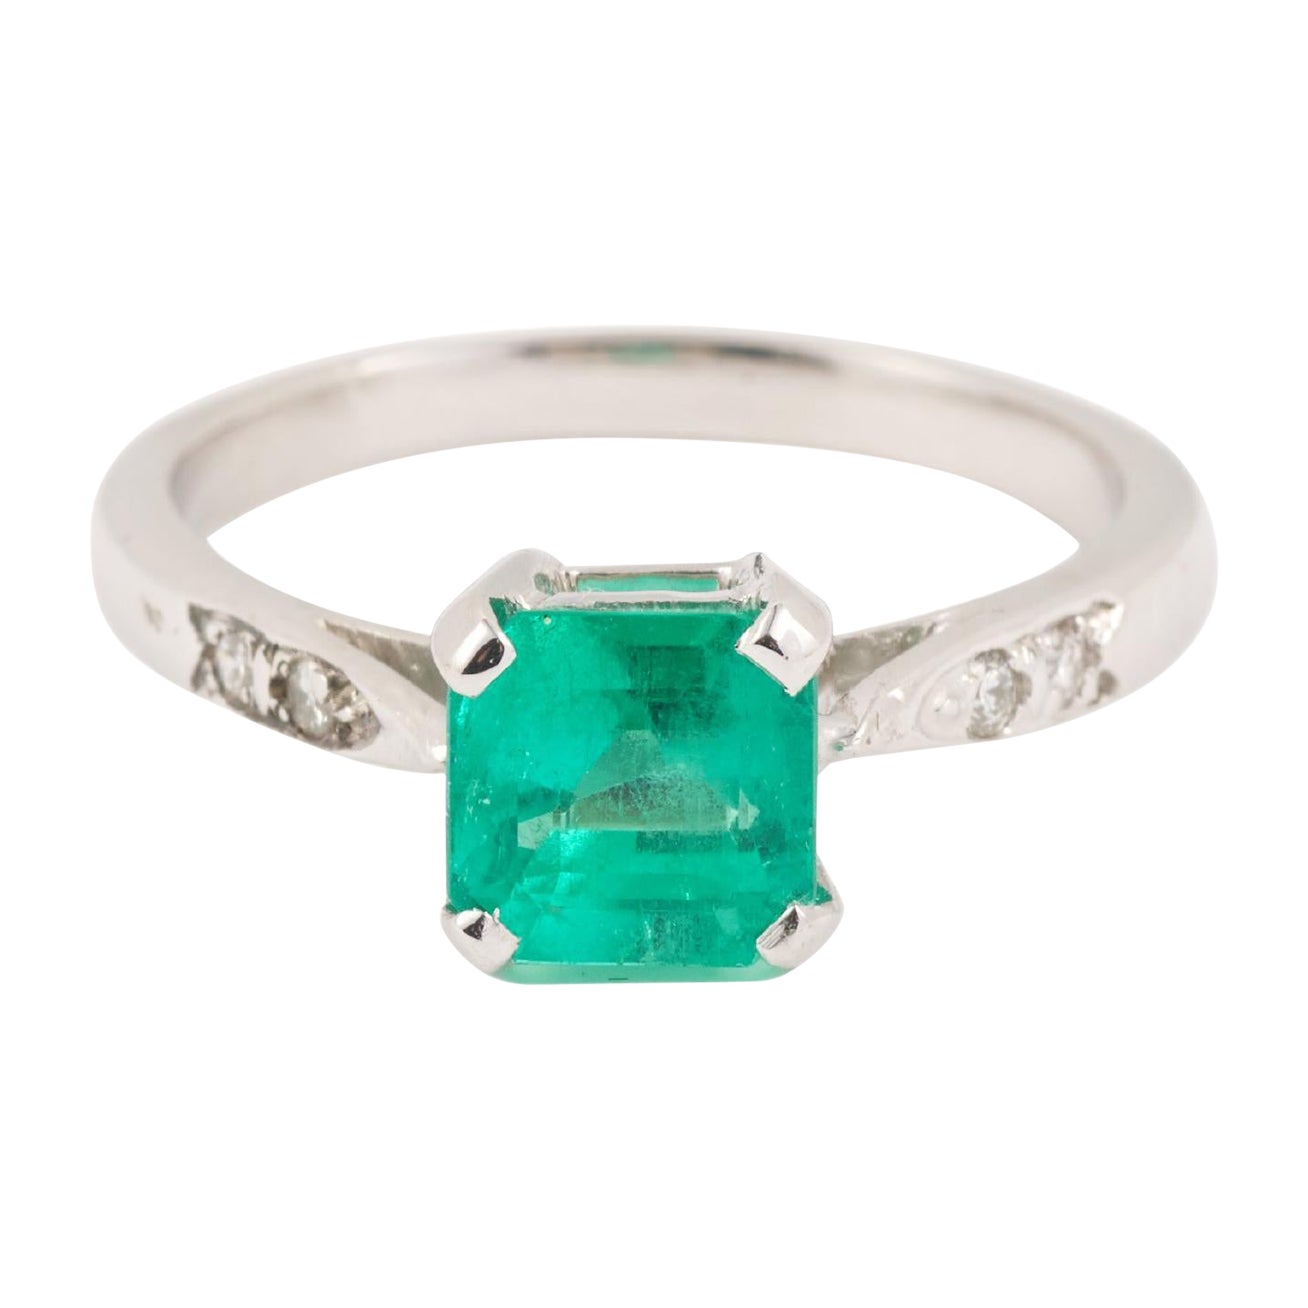 Vintage Certified 1.36 Carats Colombian Emerald Diamonds 18K White Gold Ring